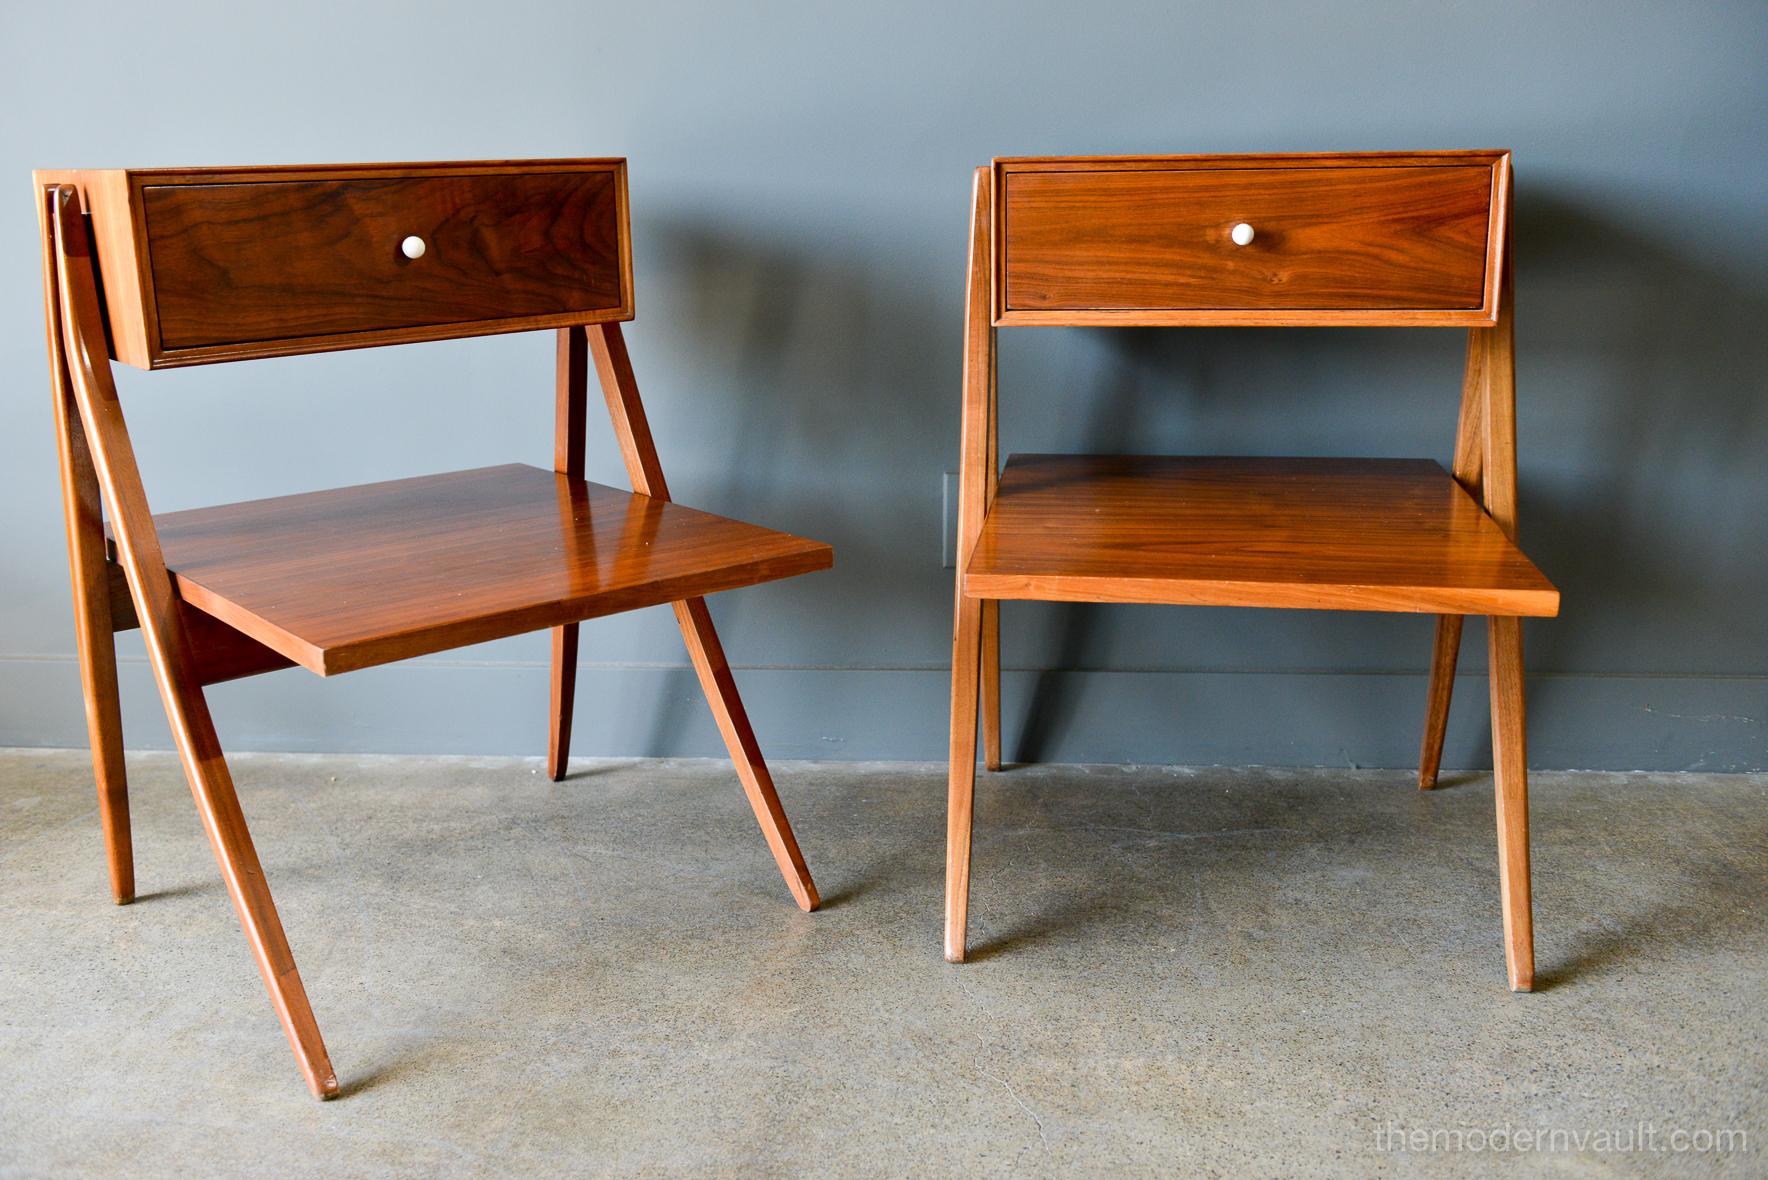 Walnut floating a frame nightstands or side tables by Kipp Stewart for Drexel, 1958. Beautiful original condition with hardly any wear. Original porcelain hardware and pullout / pull-out drawer with floating lower shelf and solid sculpted walnut